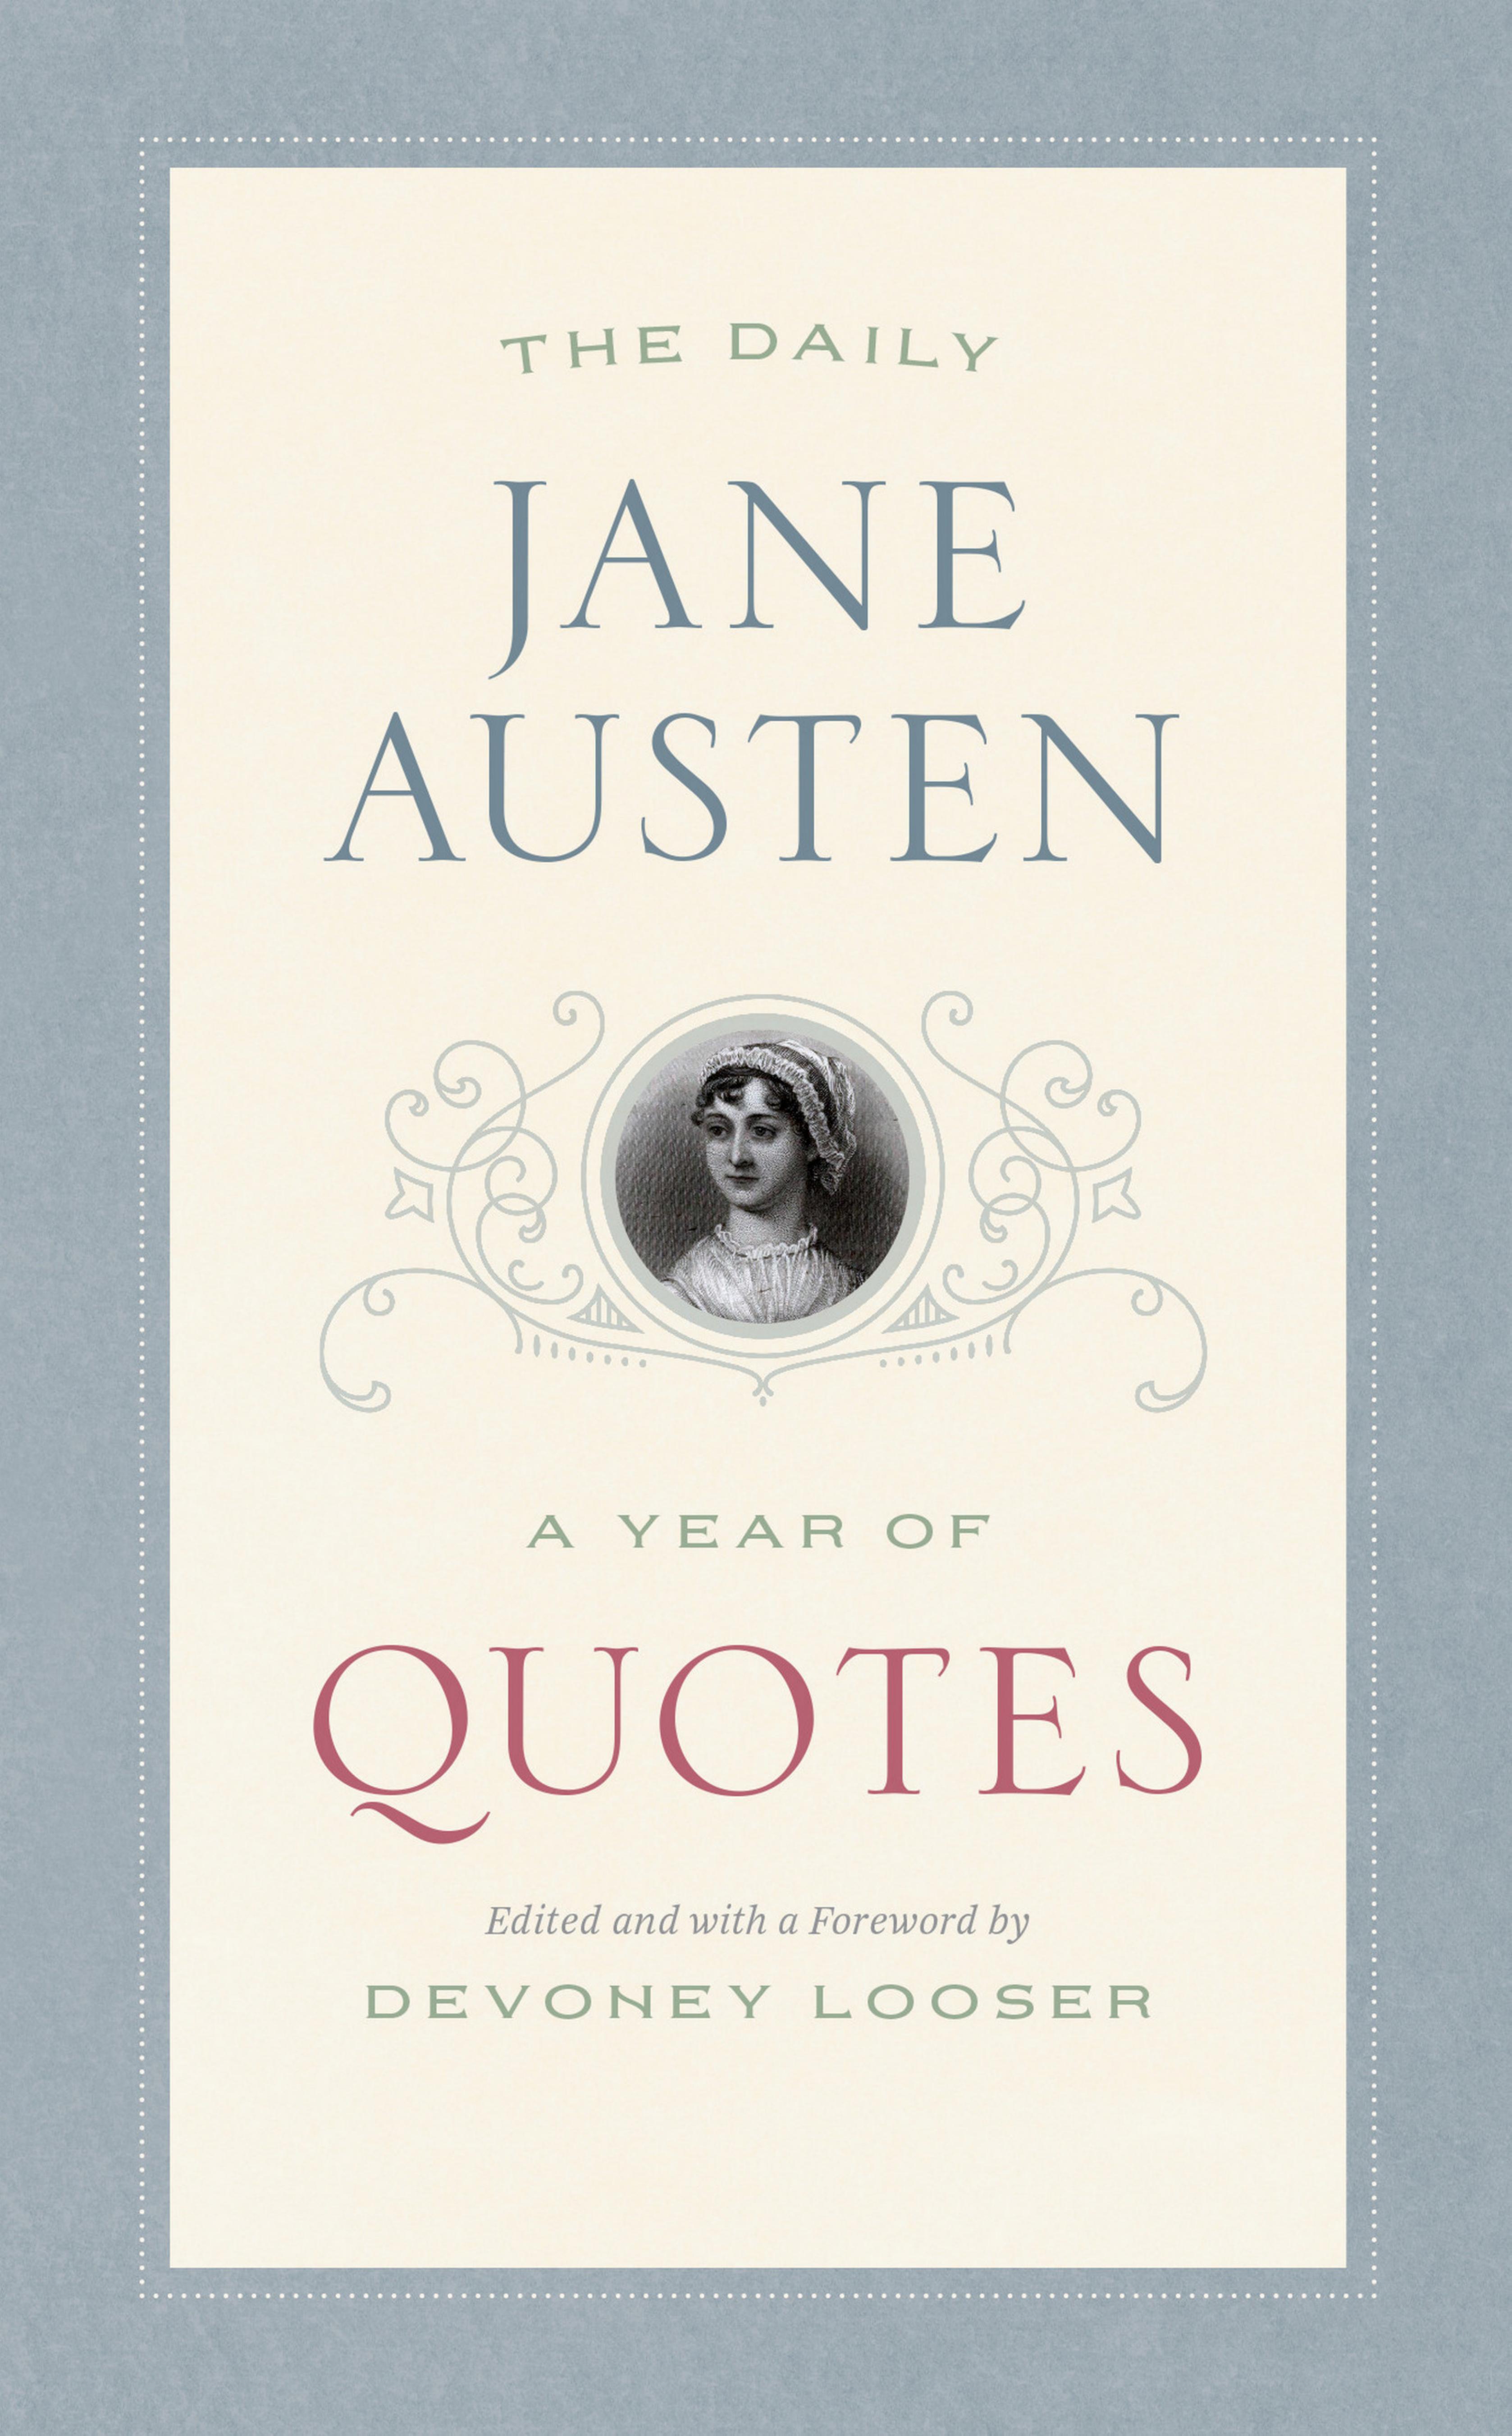 The Daily Jane Austen: A Year of Quotes by Jane Austen